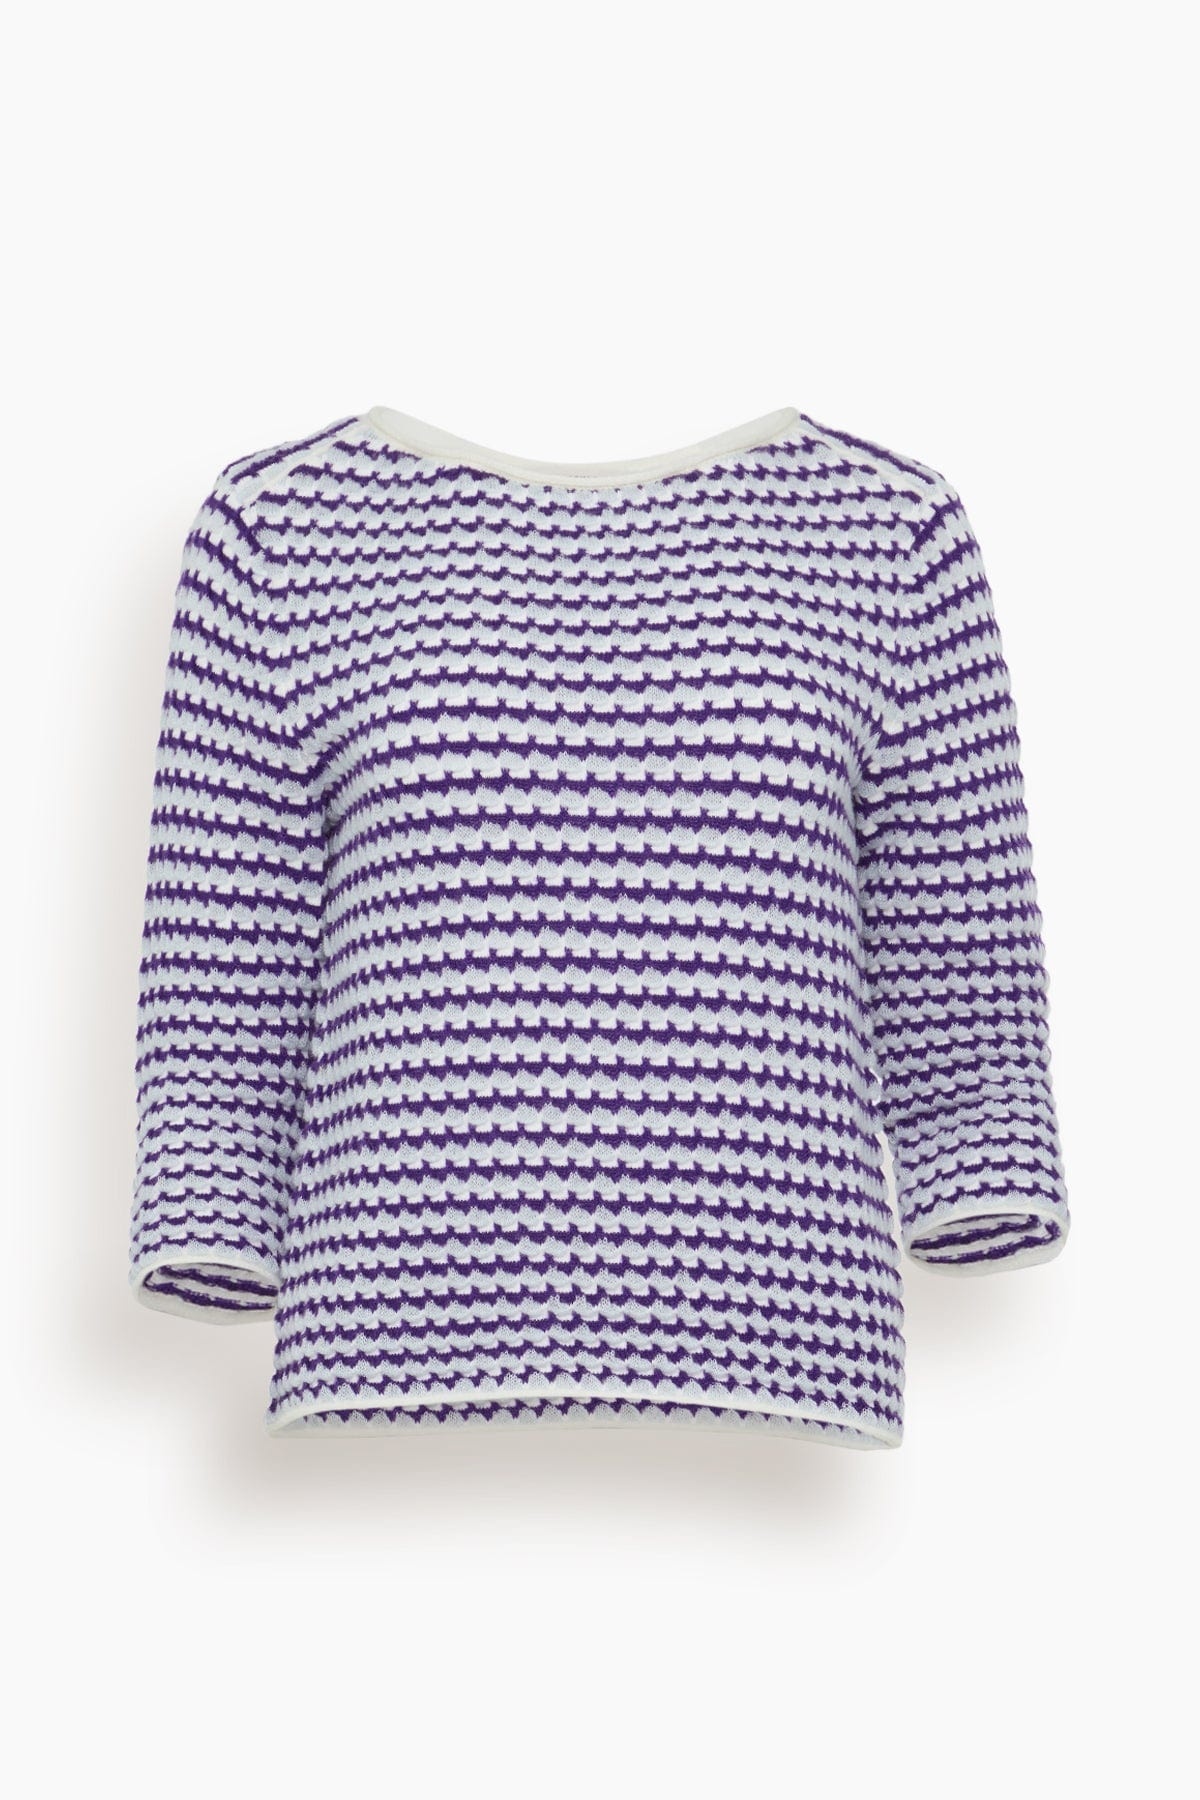 Playful Softness Pullover in Purple Blue White Mix - 1